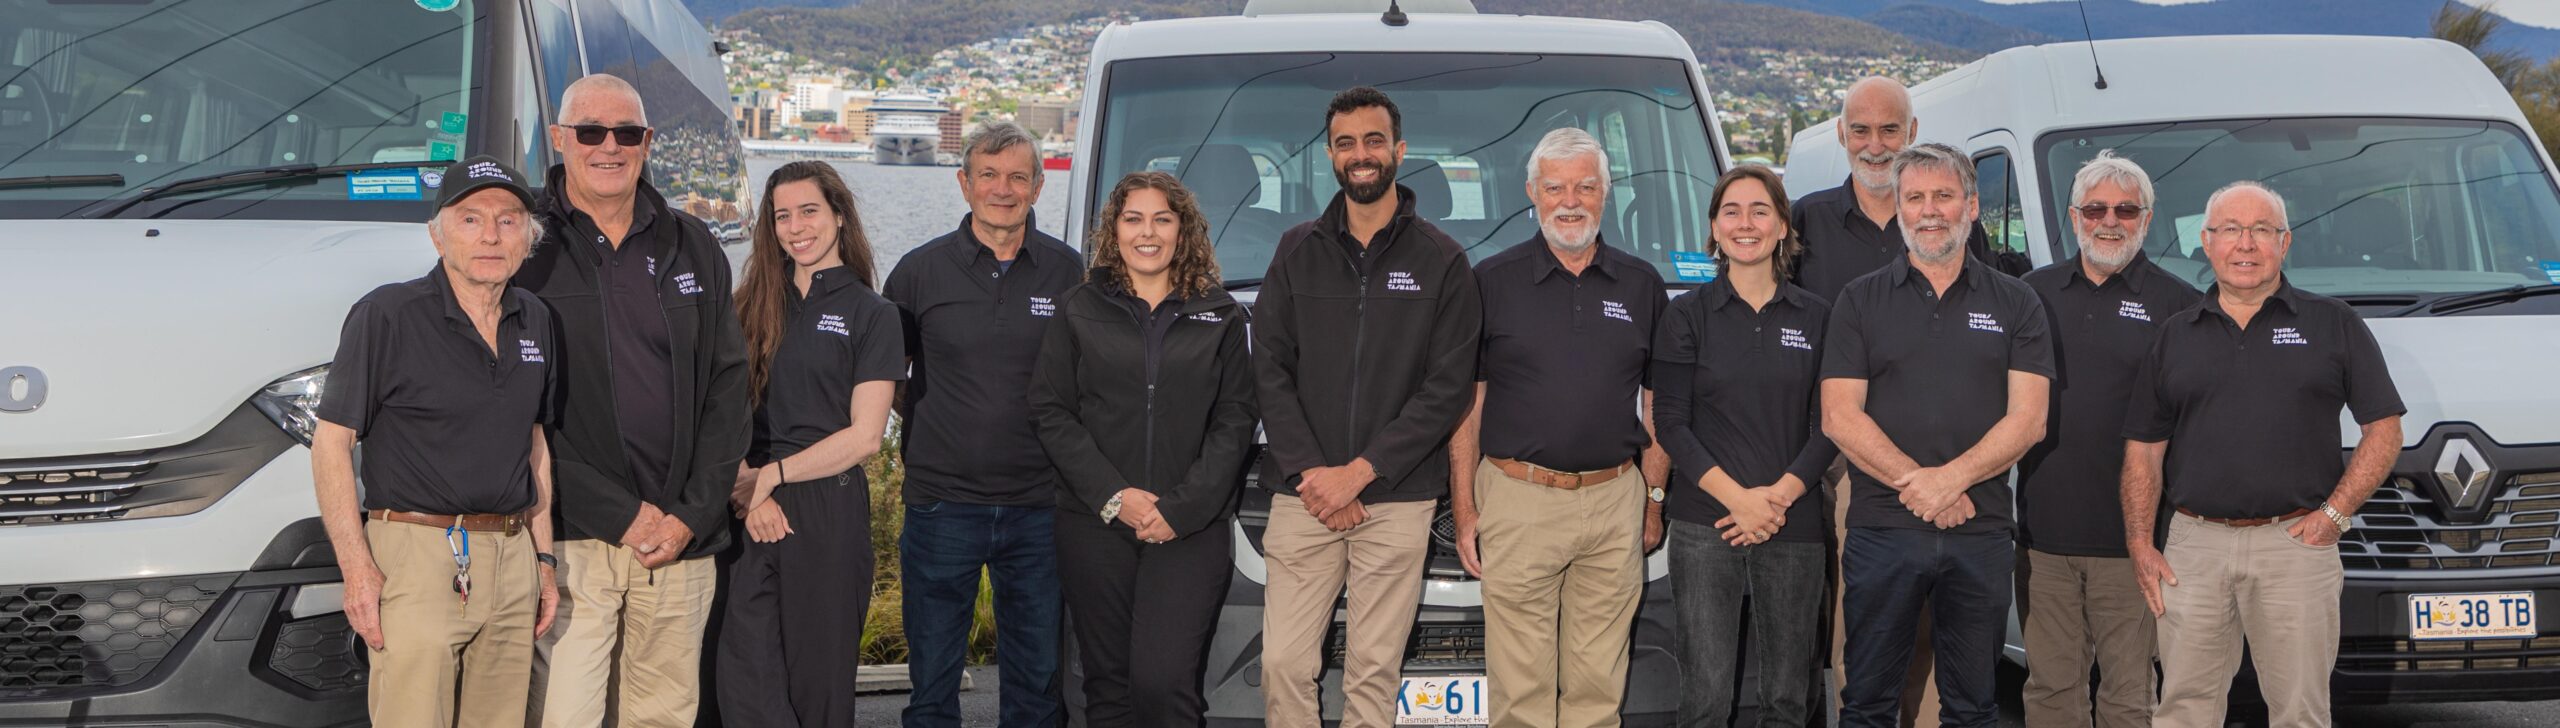 Our luxury vehicles and professional team of passionate tour guides to ensure your Tasmanian holiday is one to remember